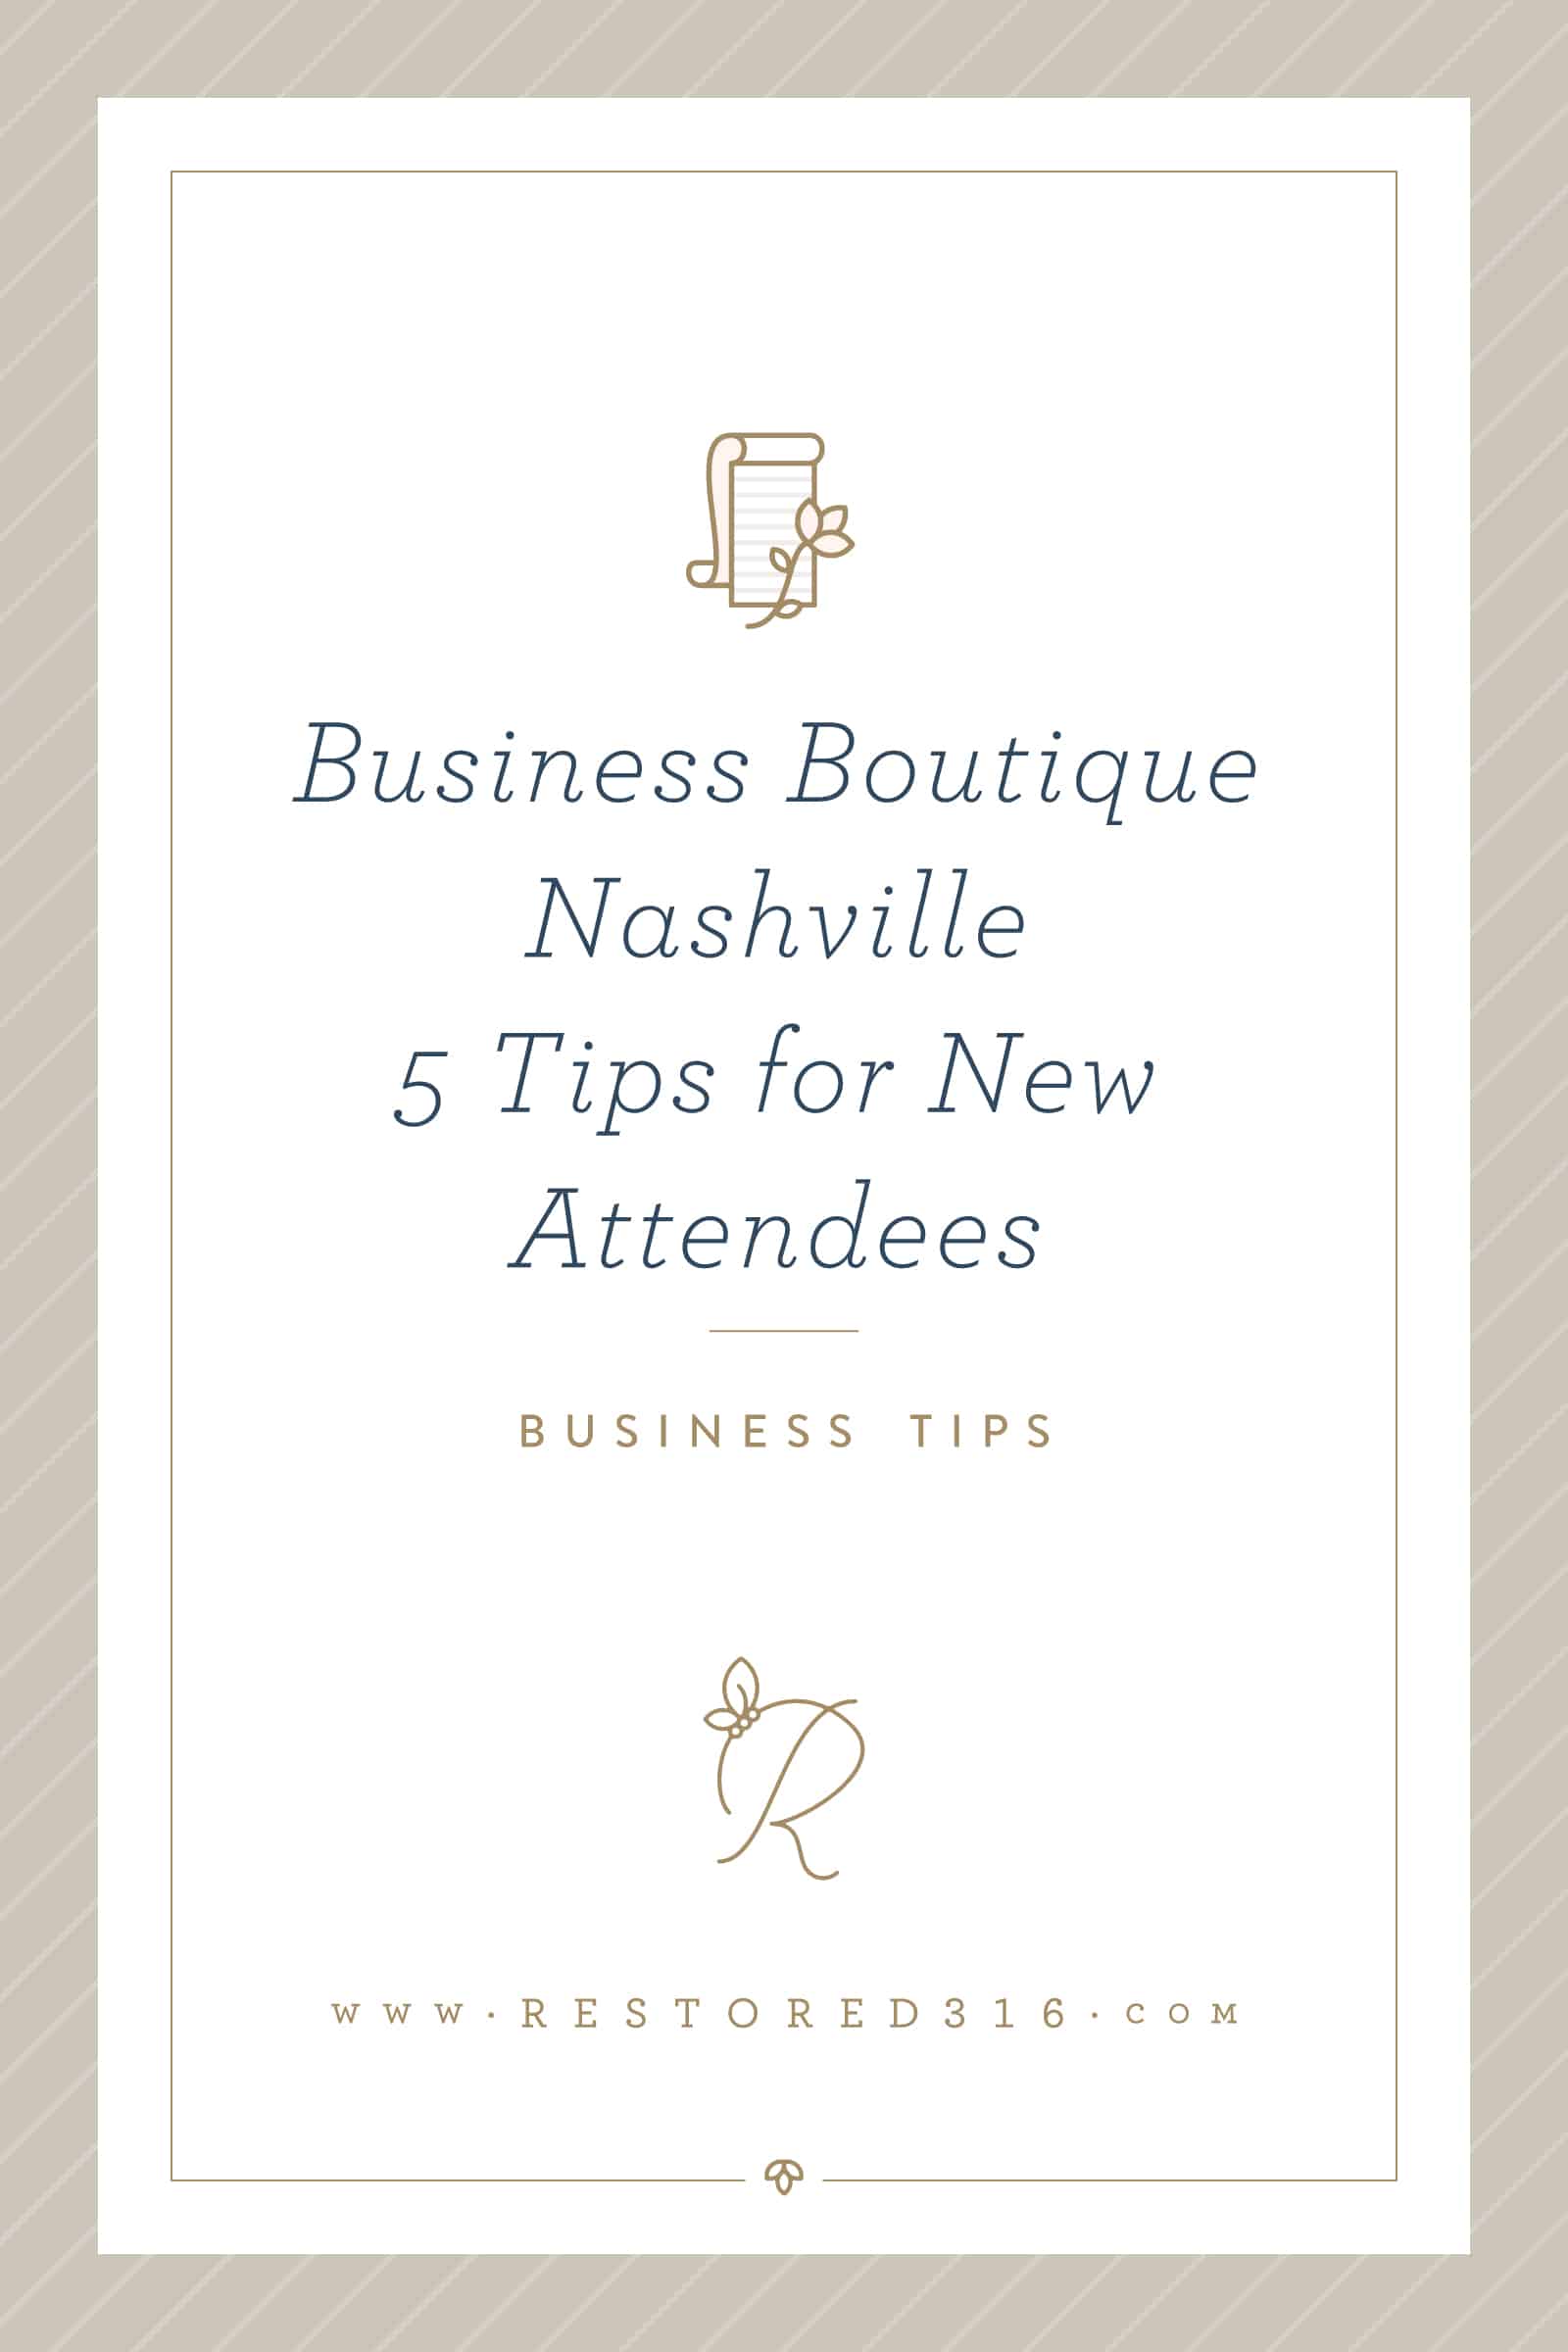 Business Boutique Nashville: 5 Tips For New Attendees